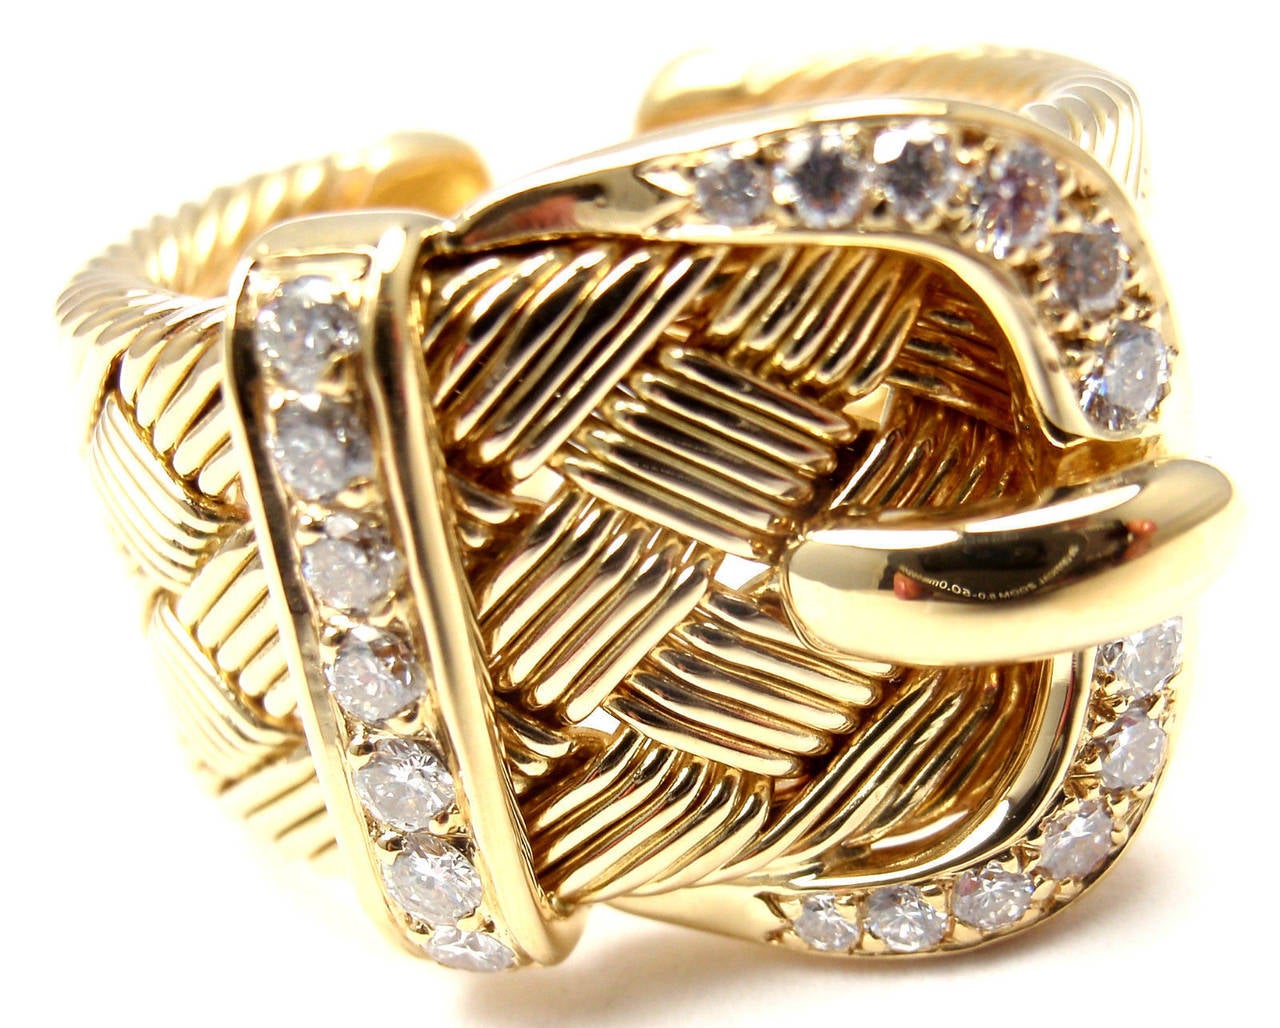 18k Yellow Gold Diamond Large Woven Buckle Ring by Hermes.
With 19 round brilliant cut diamonds VVS1 clarity G color 
total weight approx. .55ct

Details:
Ring Size: 7
Weight: 14.1 grams
Width: 16mm
Stamped Hallmarks: Hermes 750 22085 Made